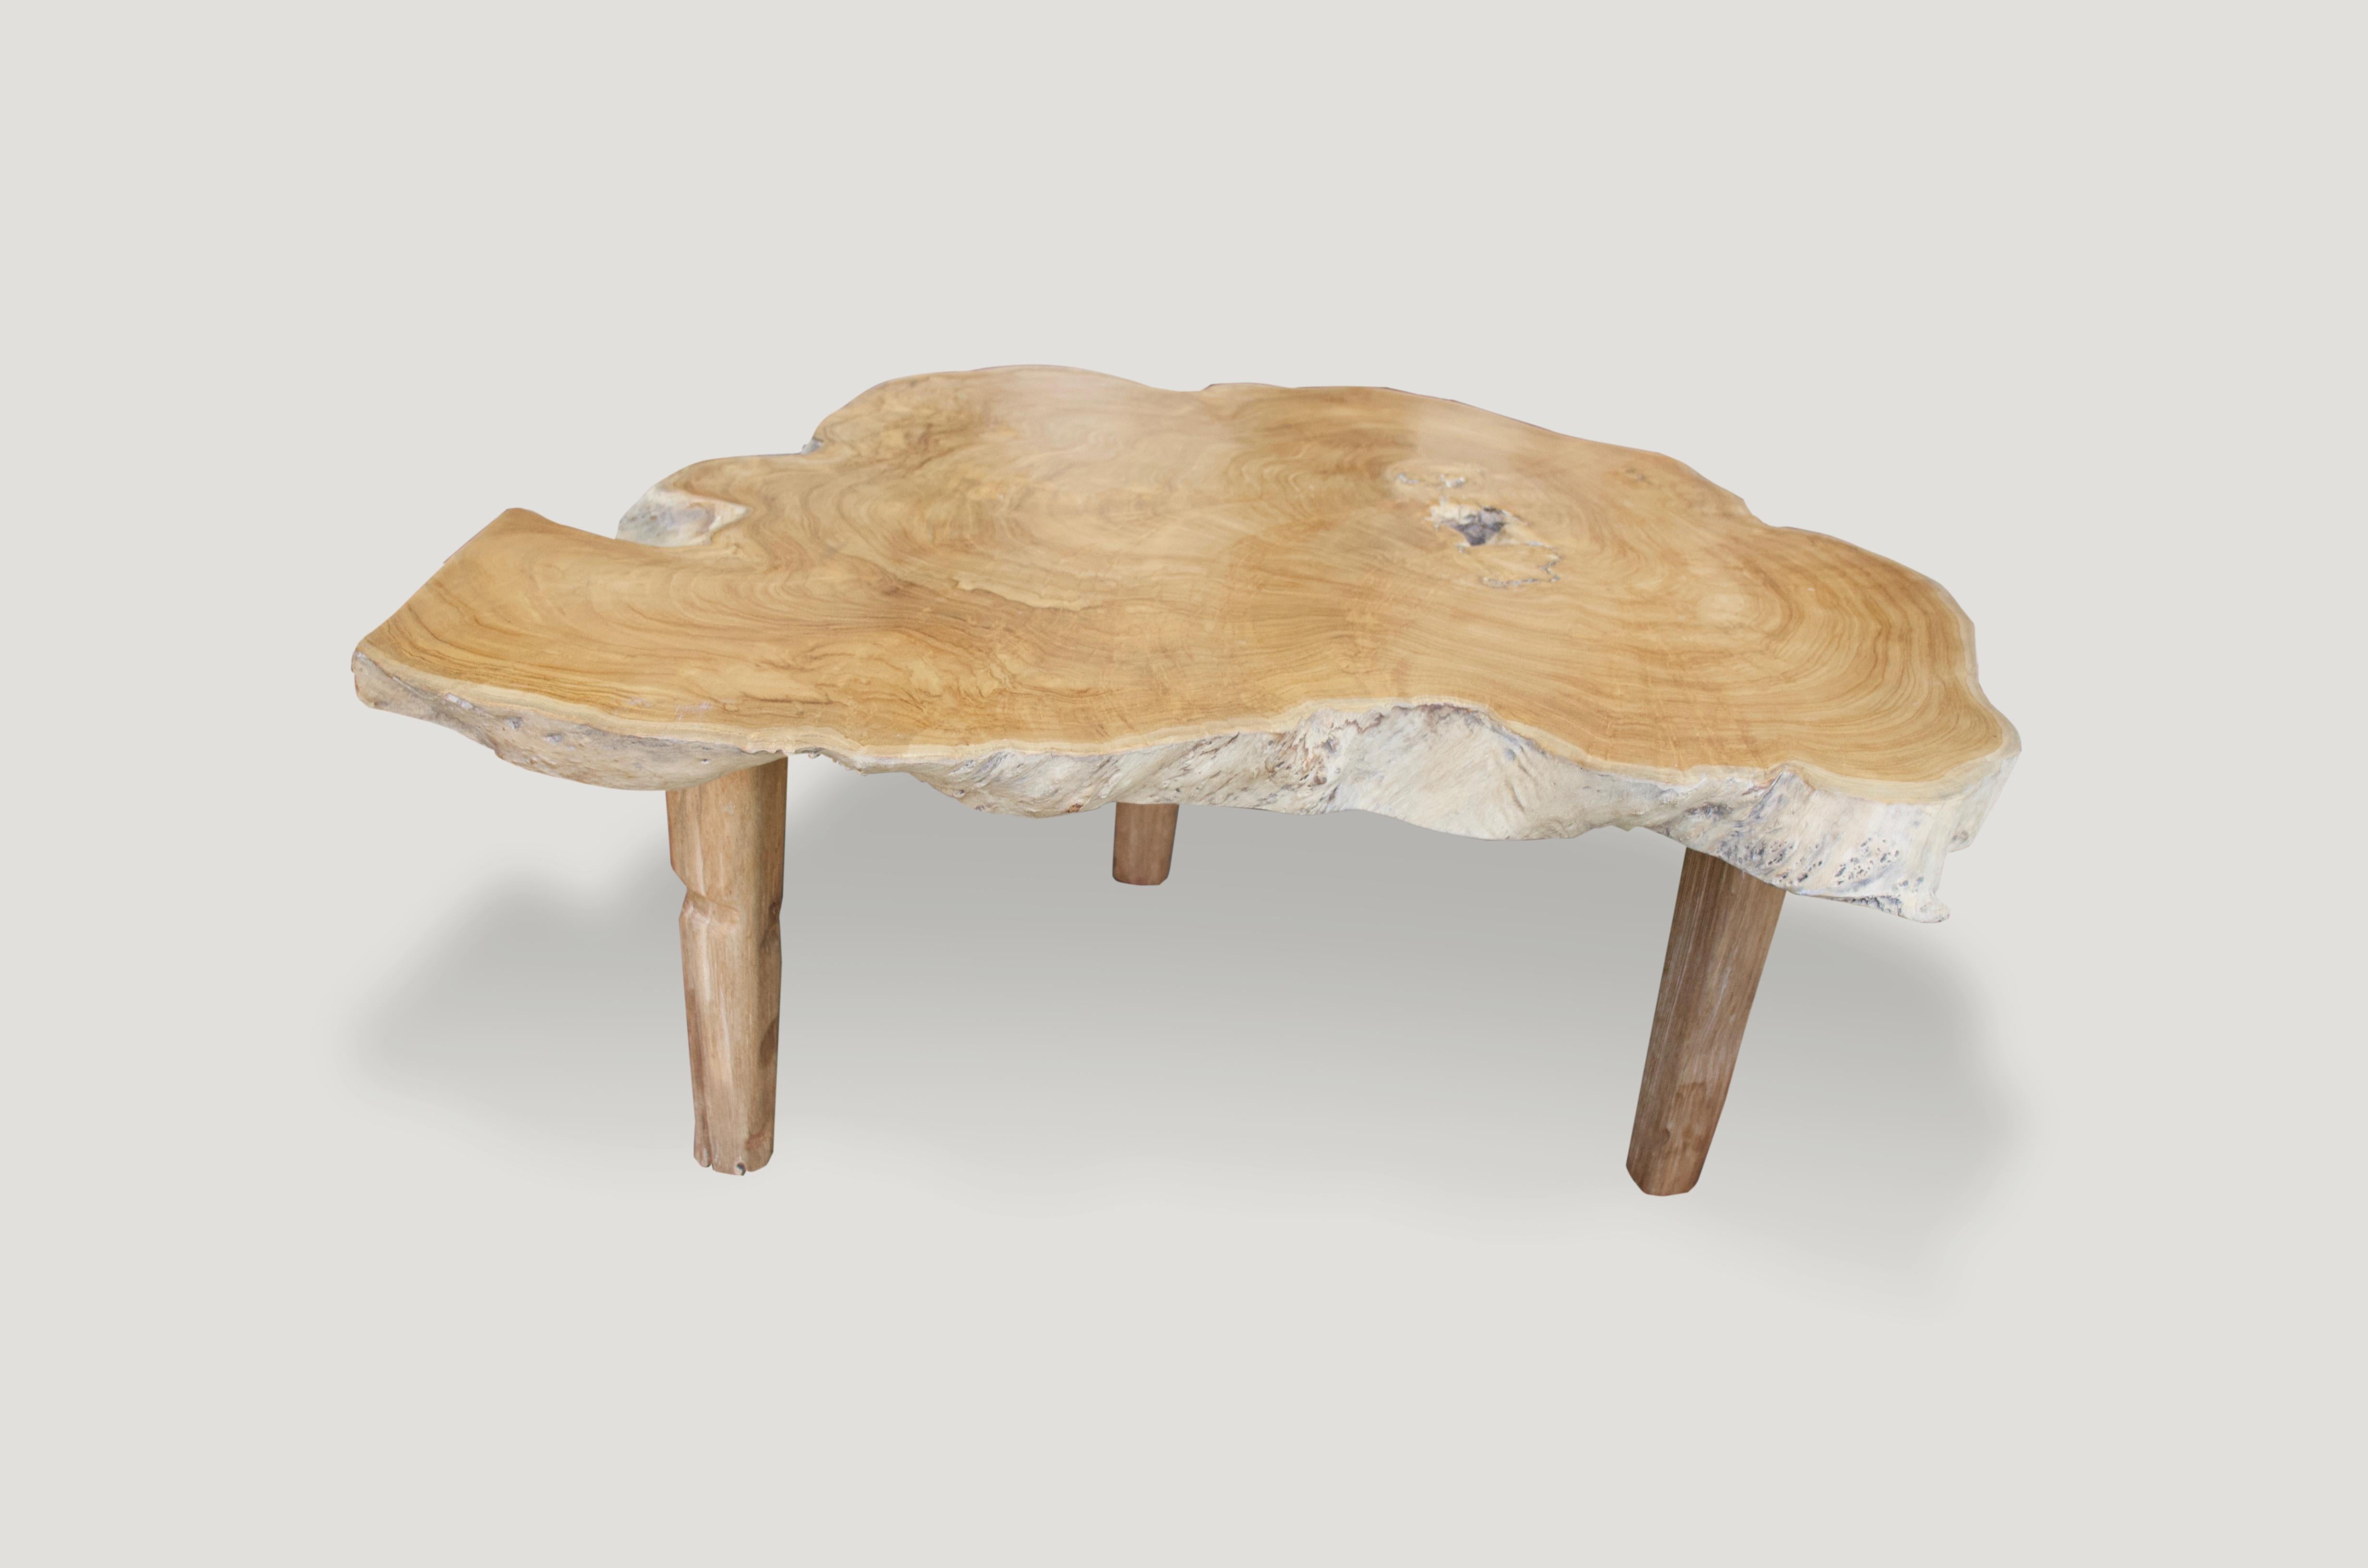 Andrianna Shamaris Single Slab Live Edge Coffee Table or Side Table In Excellent Condition For Sale In New York, NY